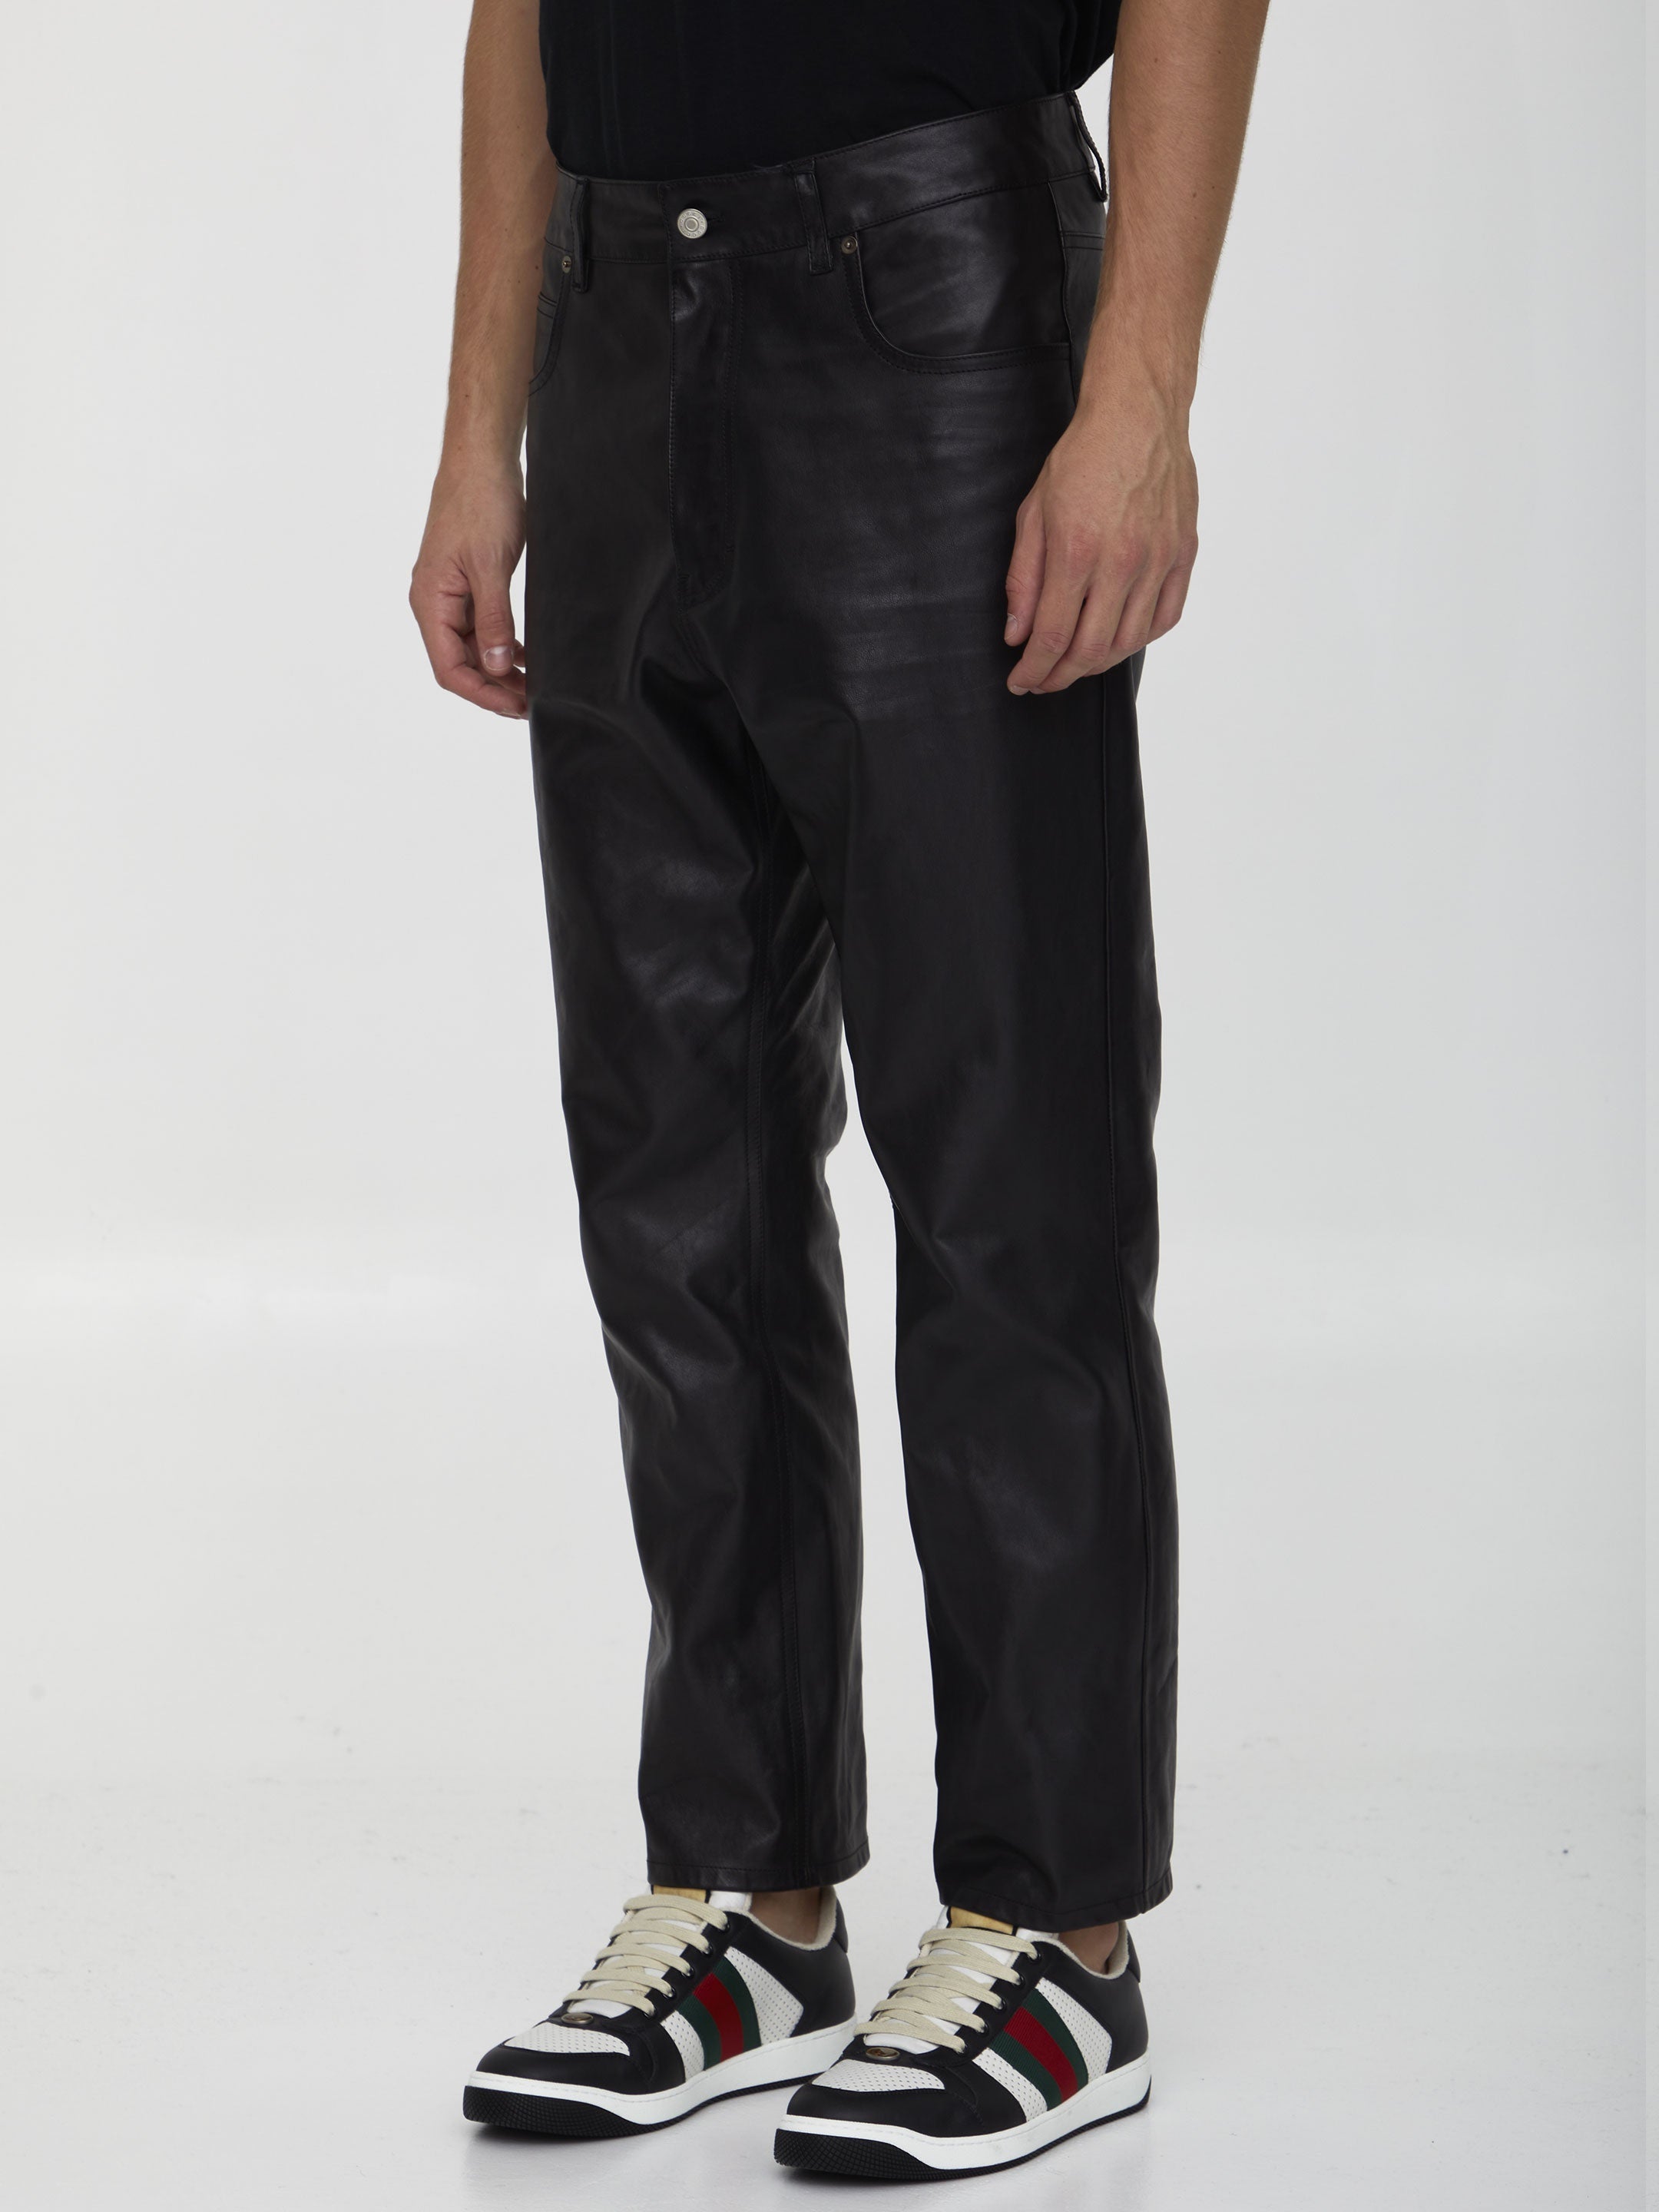 GUCCI-OUTLET-SALE-Shiny-leather-trousers-Hosen-48-BLACK-ARCHIVE-COLLECTION-2.jpg